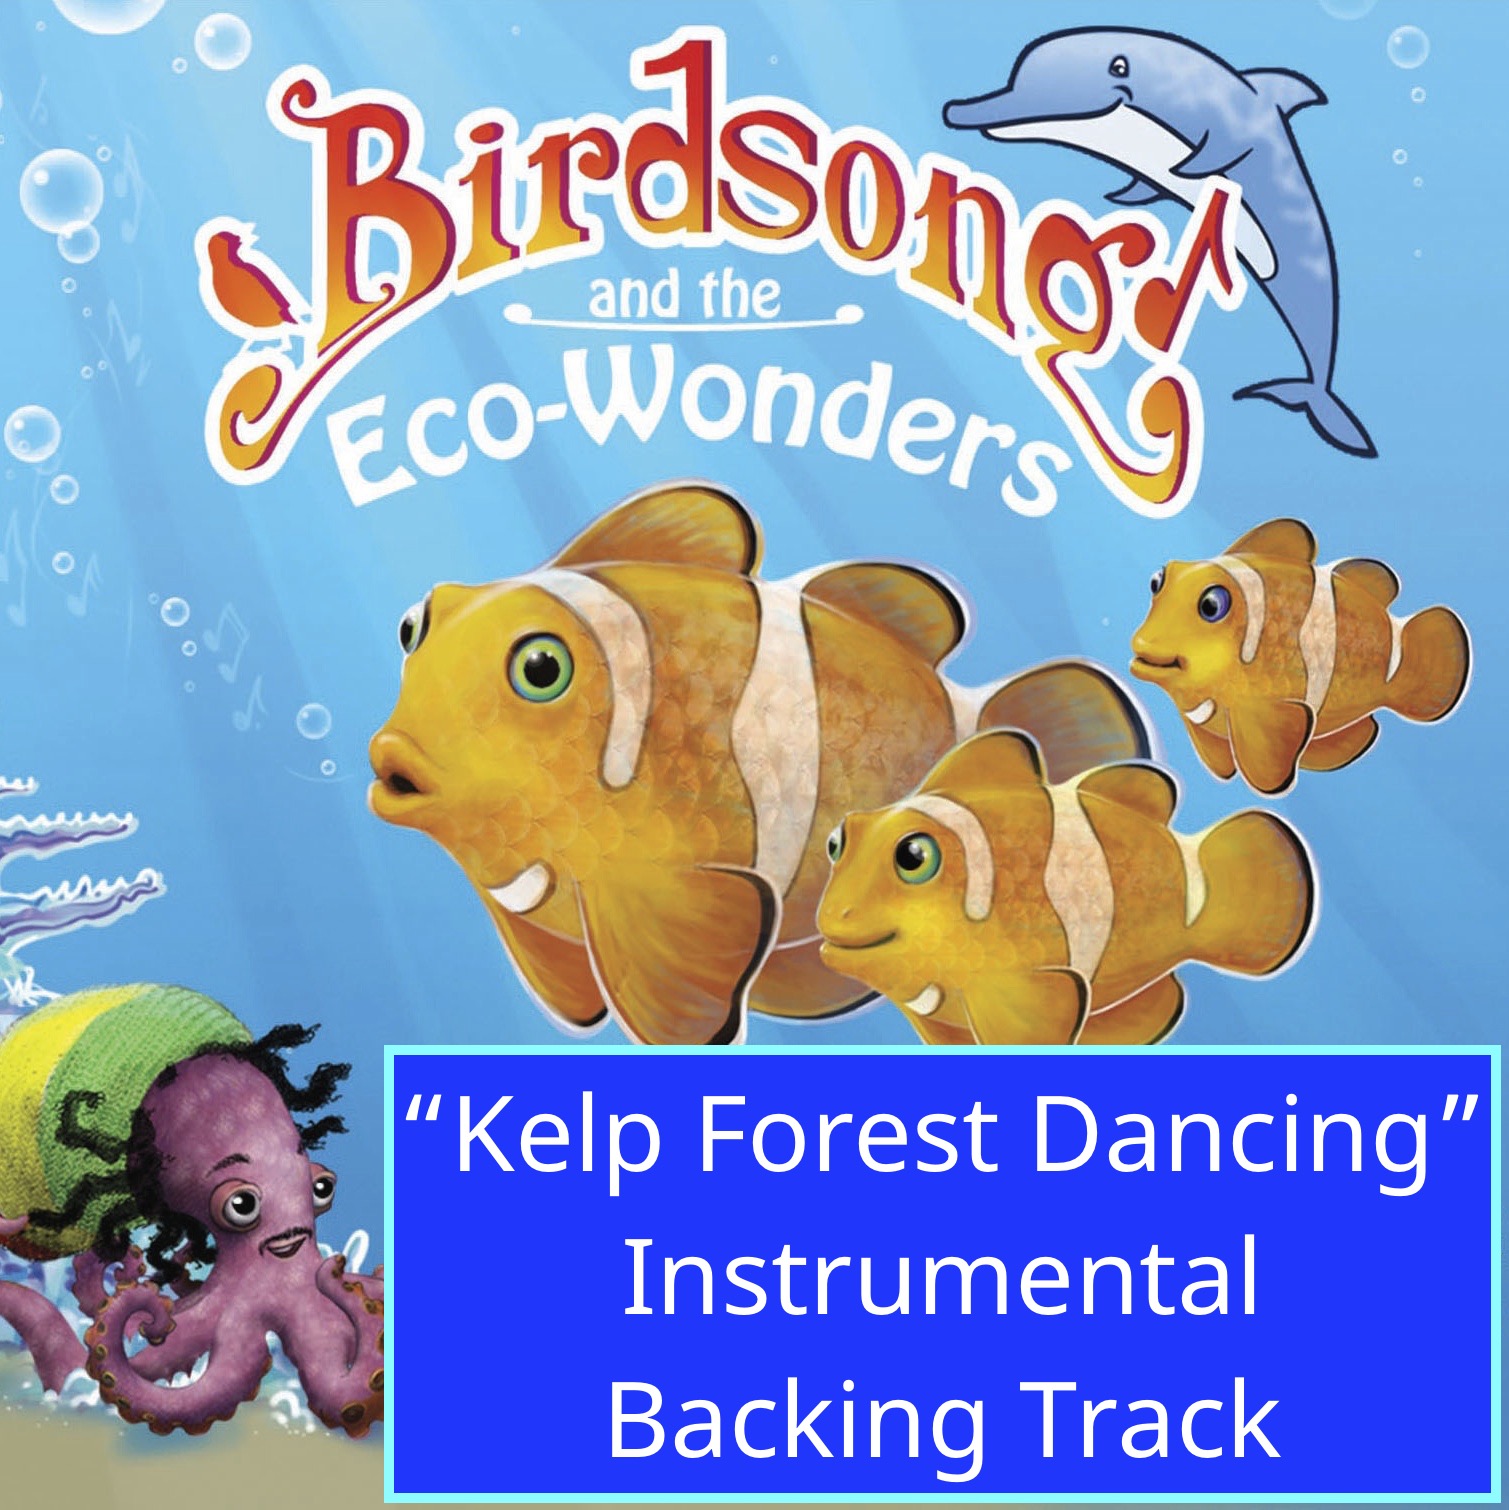 Barry difference Discuss Kelp Forest Dancing” – Instrumental Backing Track- with Lyrics • Birdsong  and the Eco-Wonders • Animal Songs for Kids